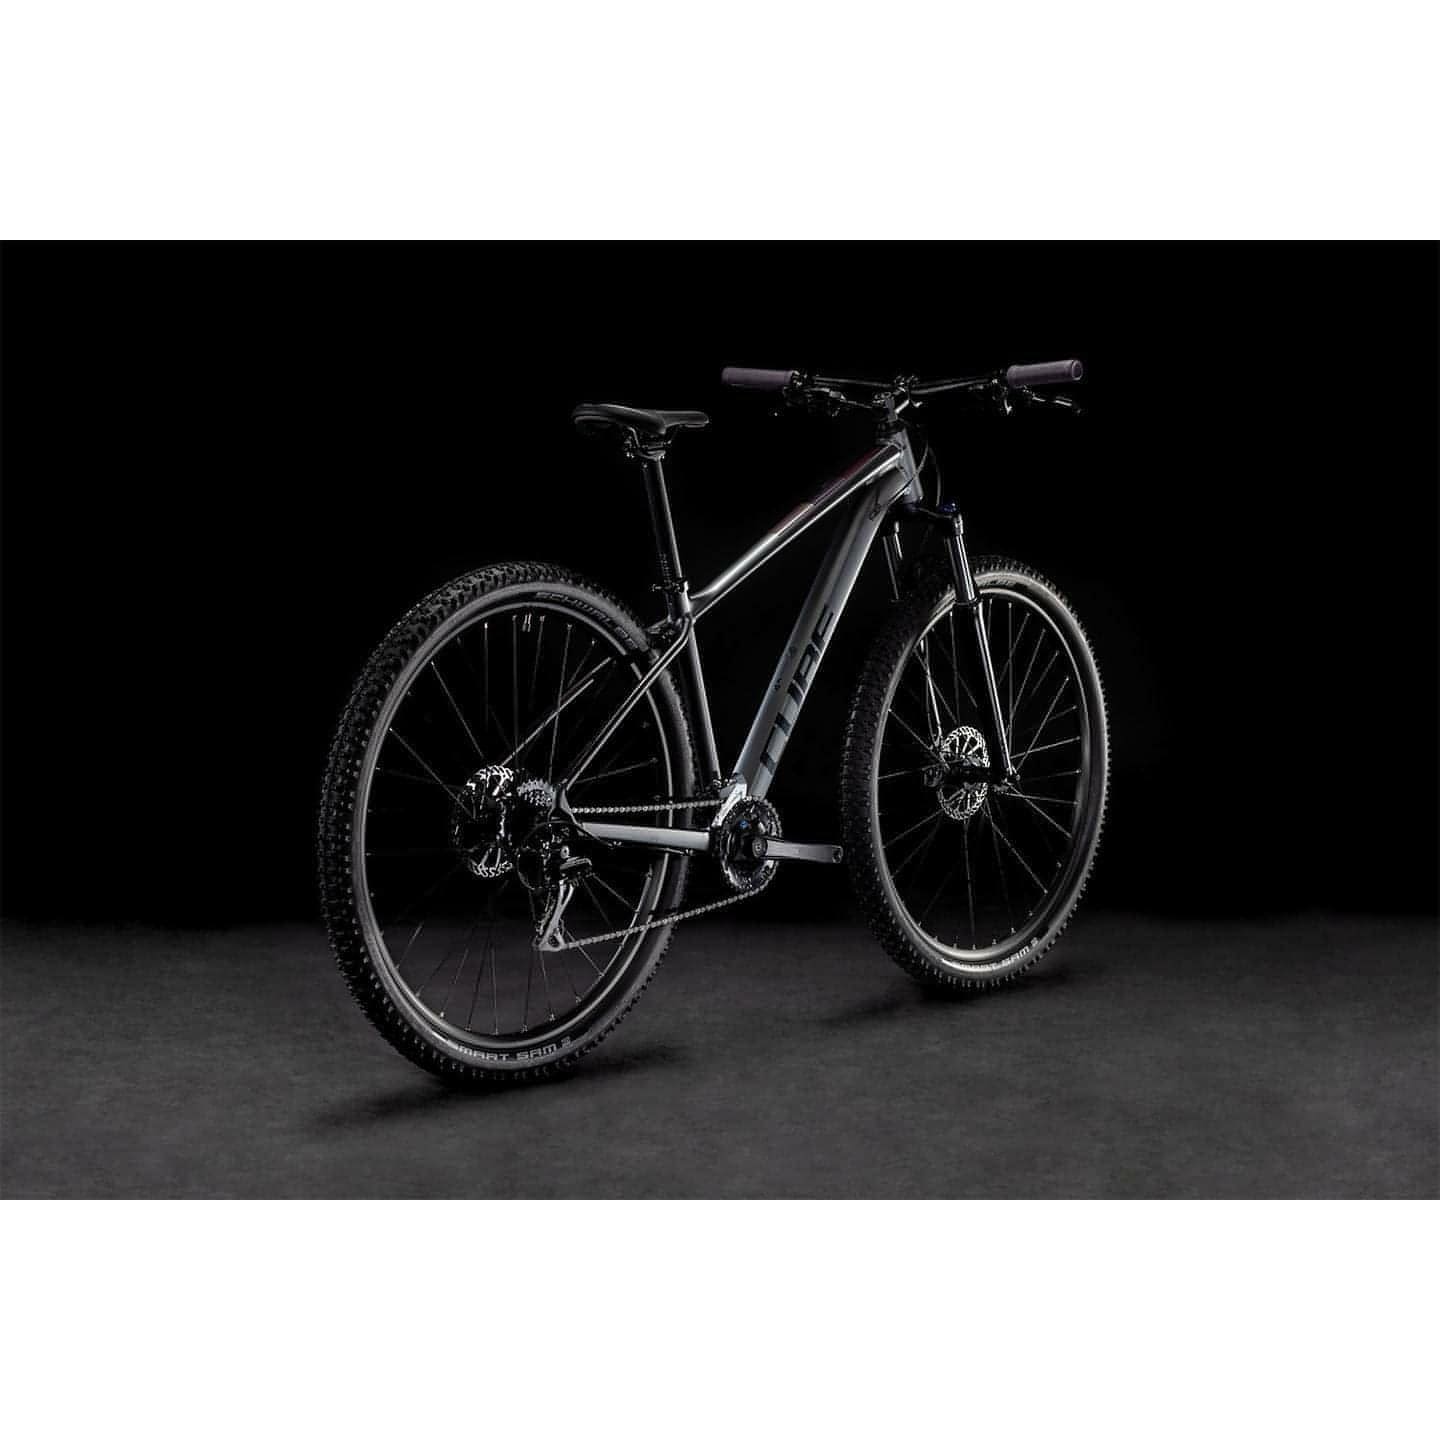 Cube Access WS EXC Womens Mountain Bike 2022 - Grey - Start Fitness